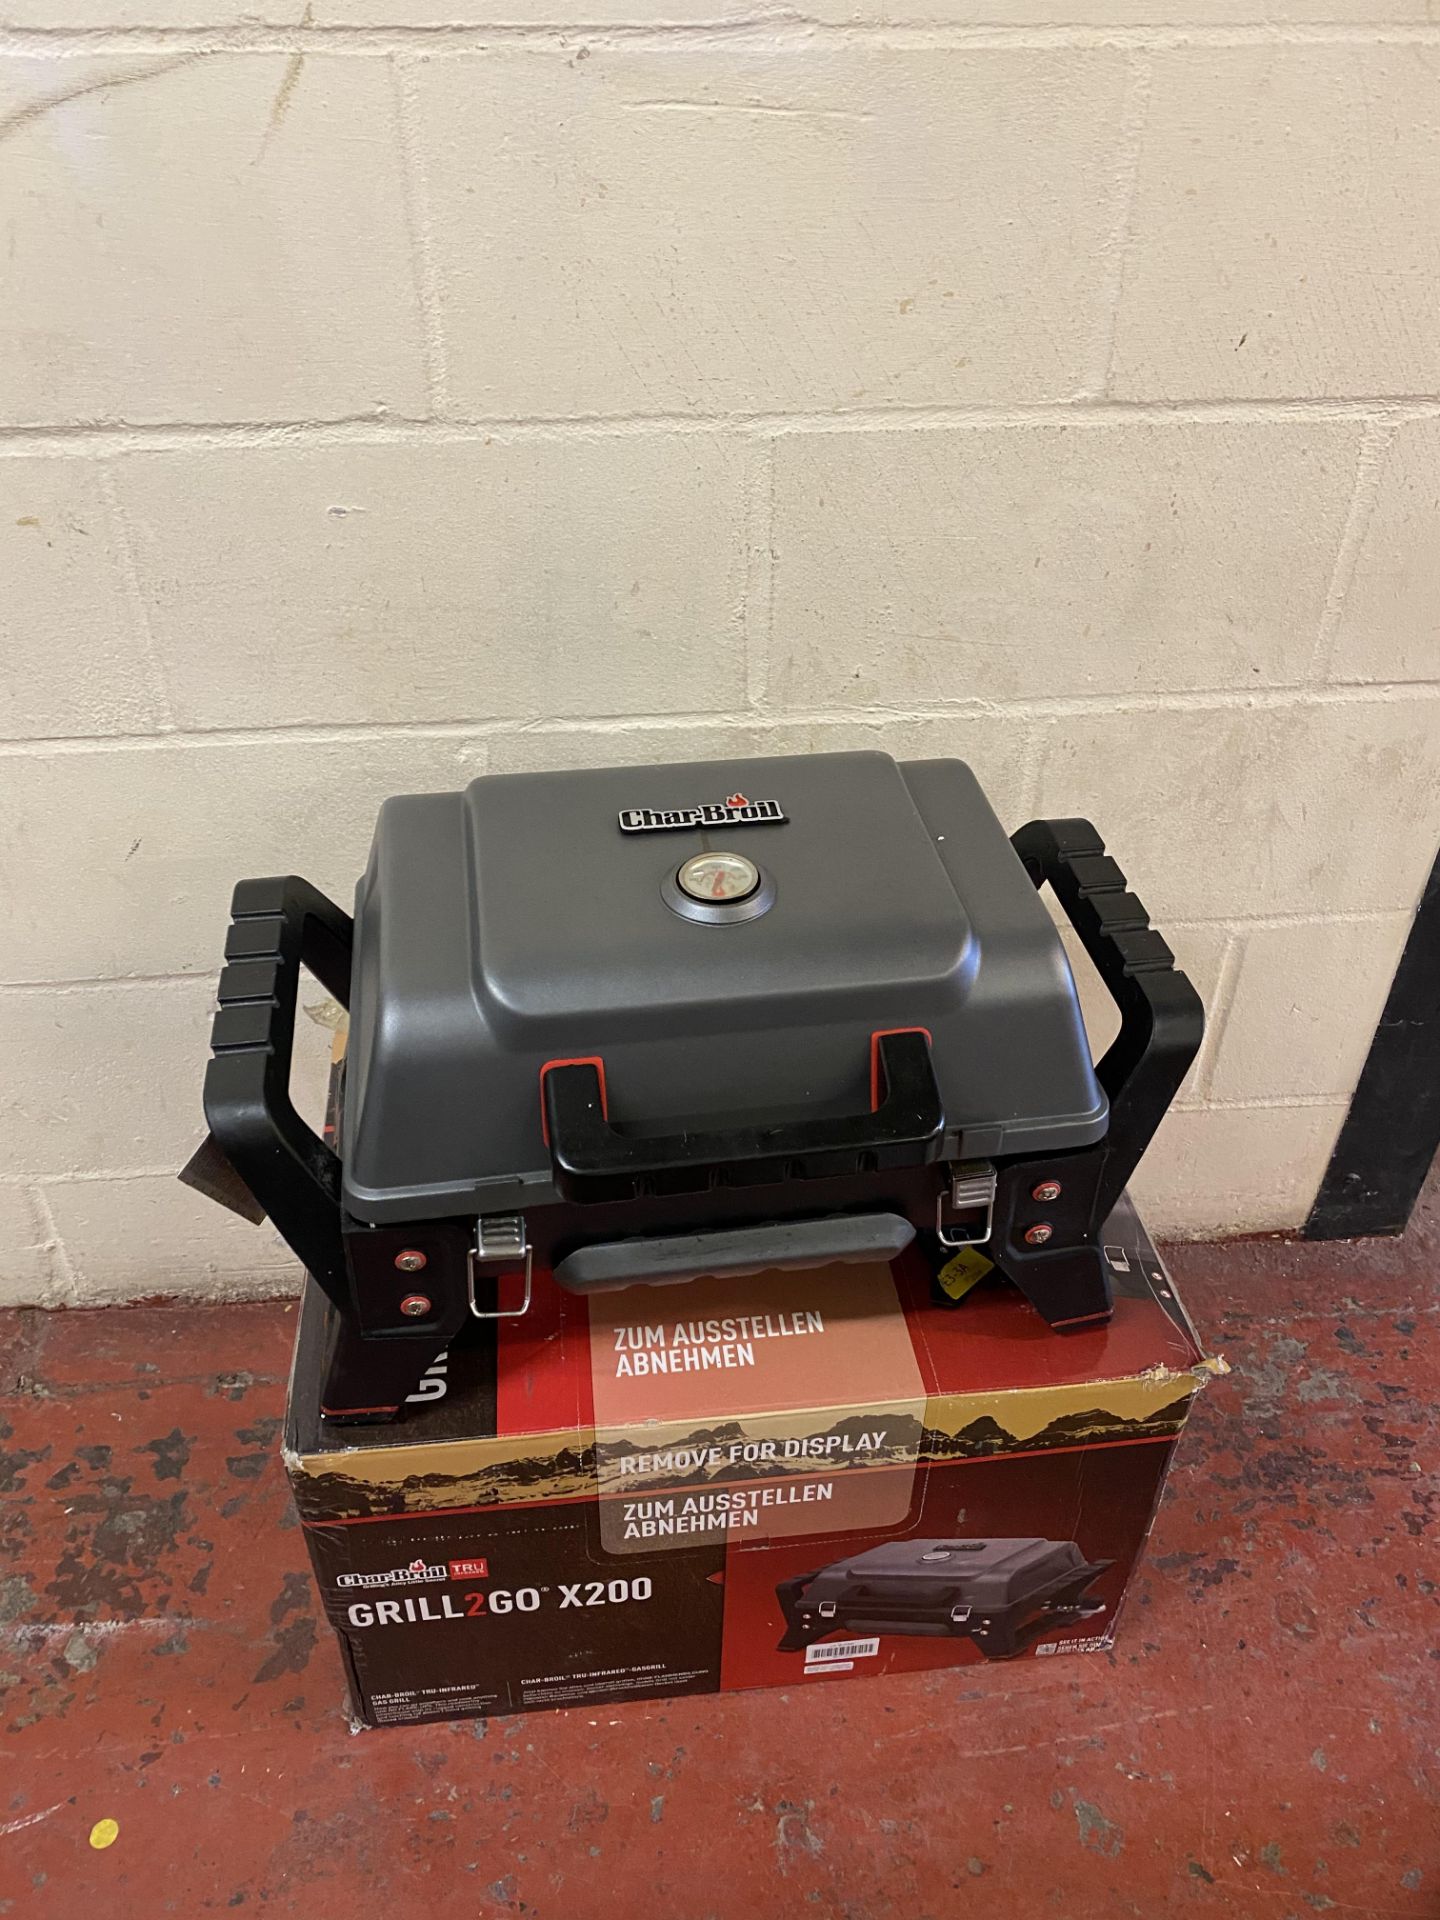 Char-Broil X200 Grill2Go Portable BBQ Grill (heavely used, see image) RRP £120 - Image 2 of 3